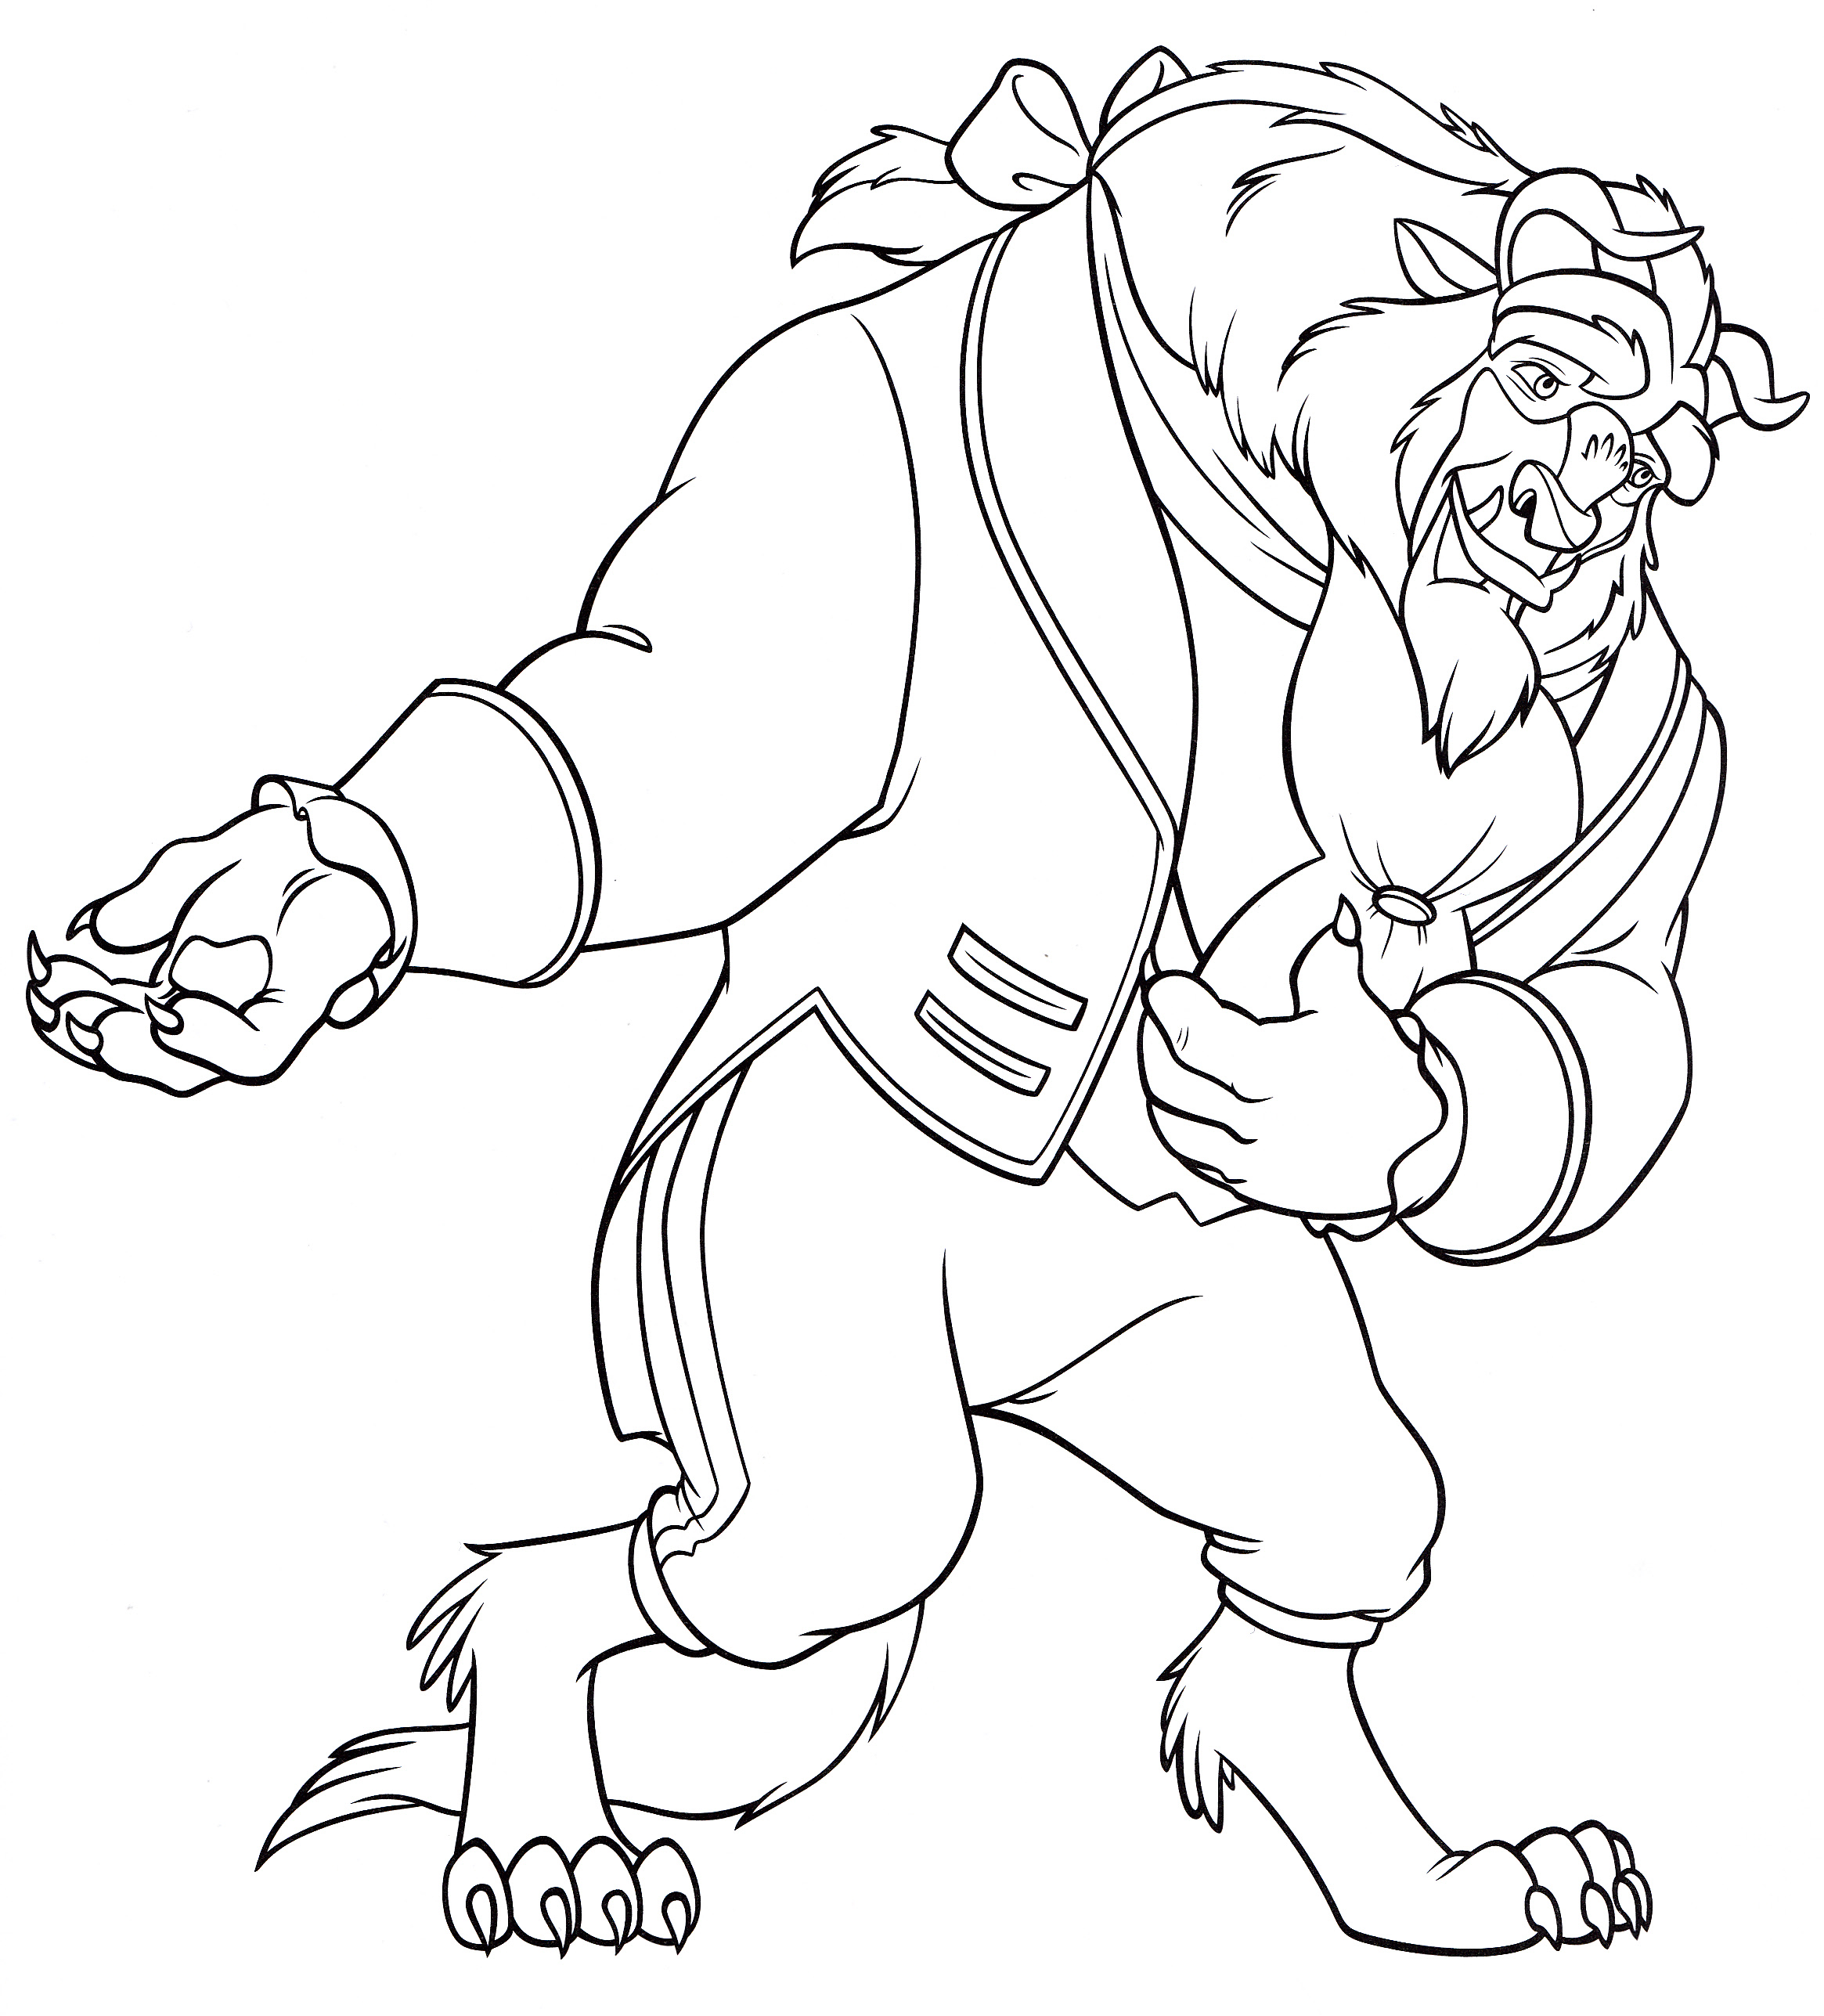 Walt Disney Coloring Pages – The Beast - Walt Disney Characters Photo